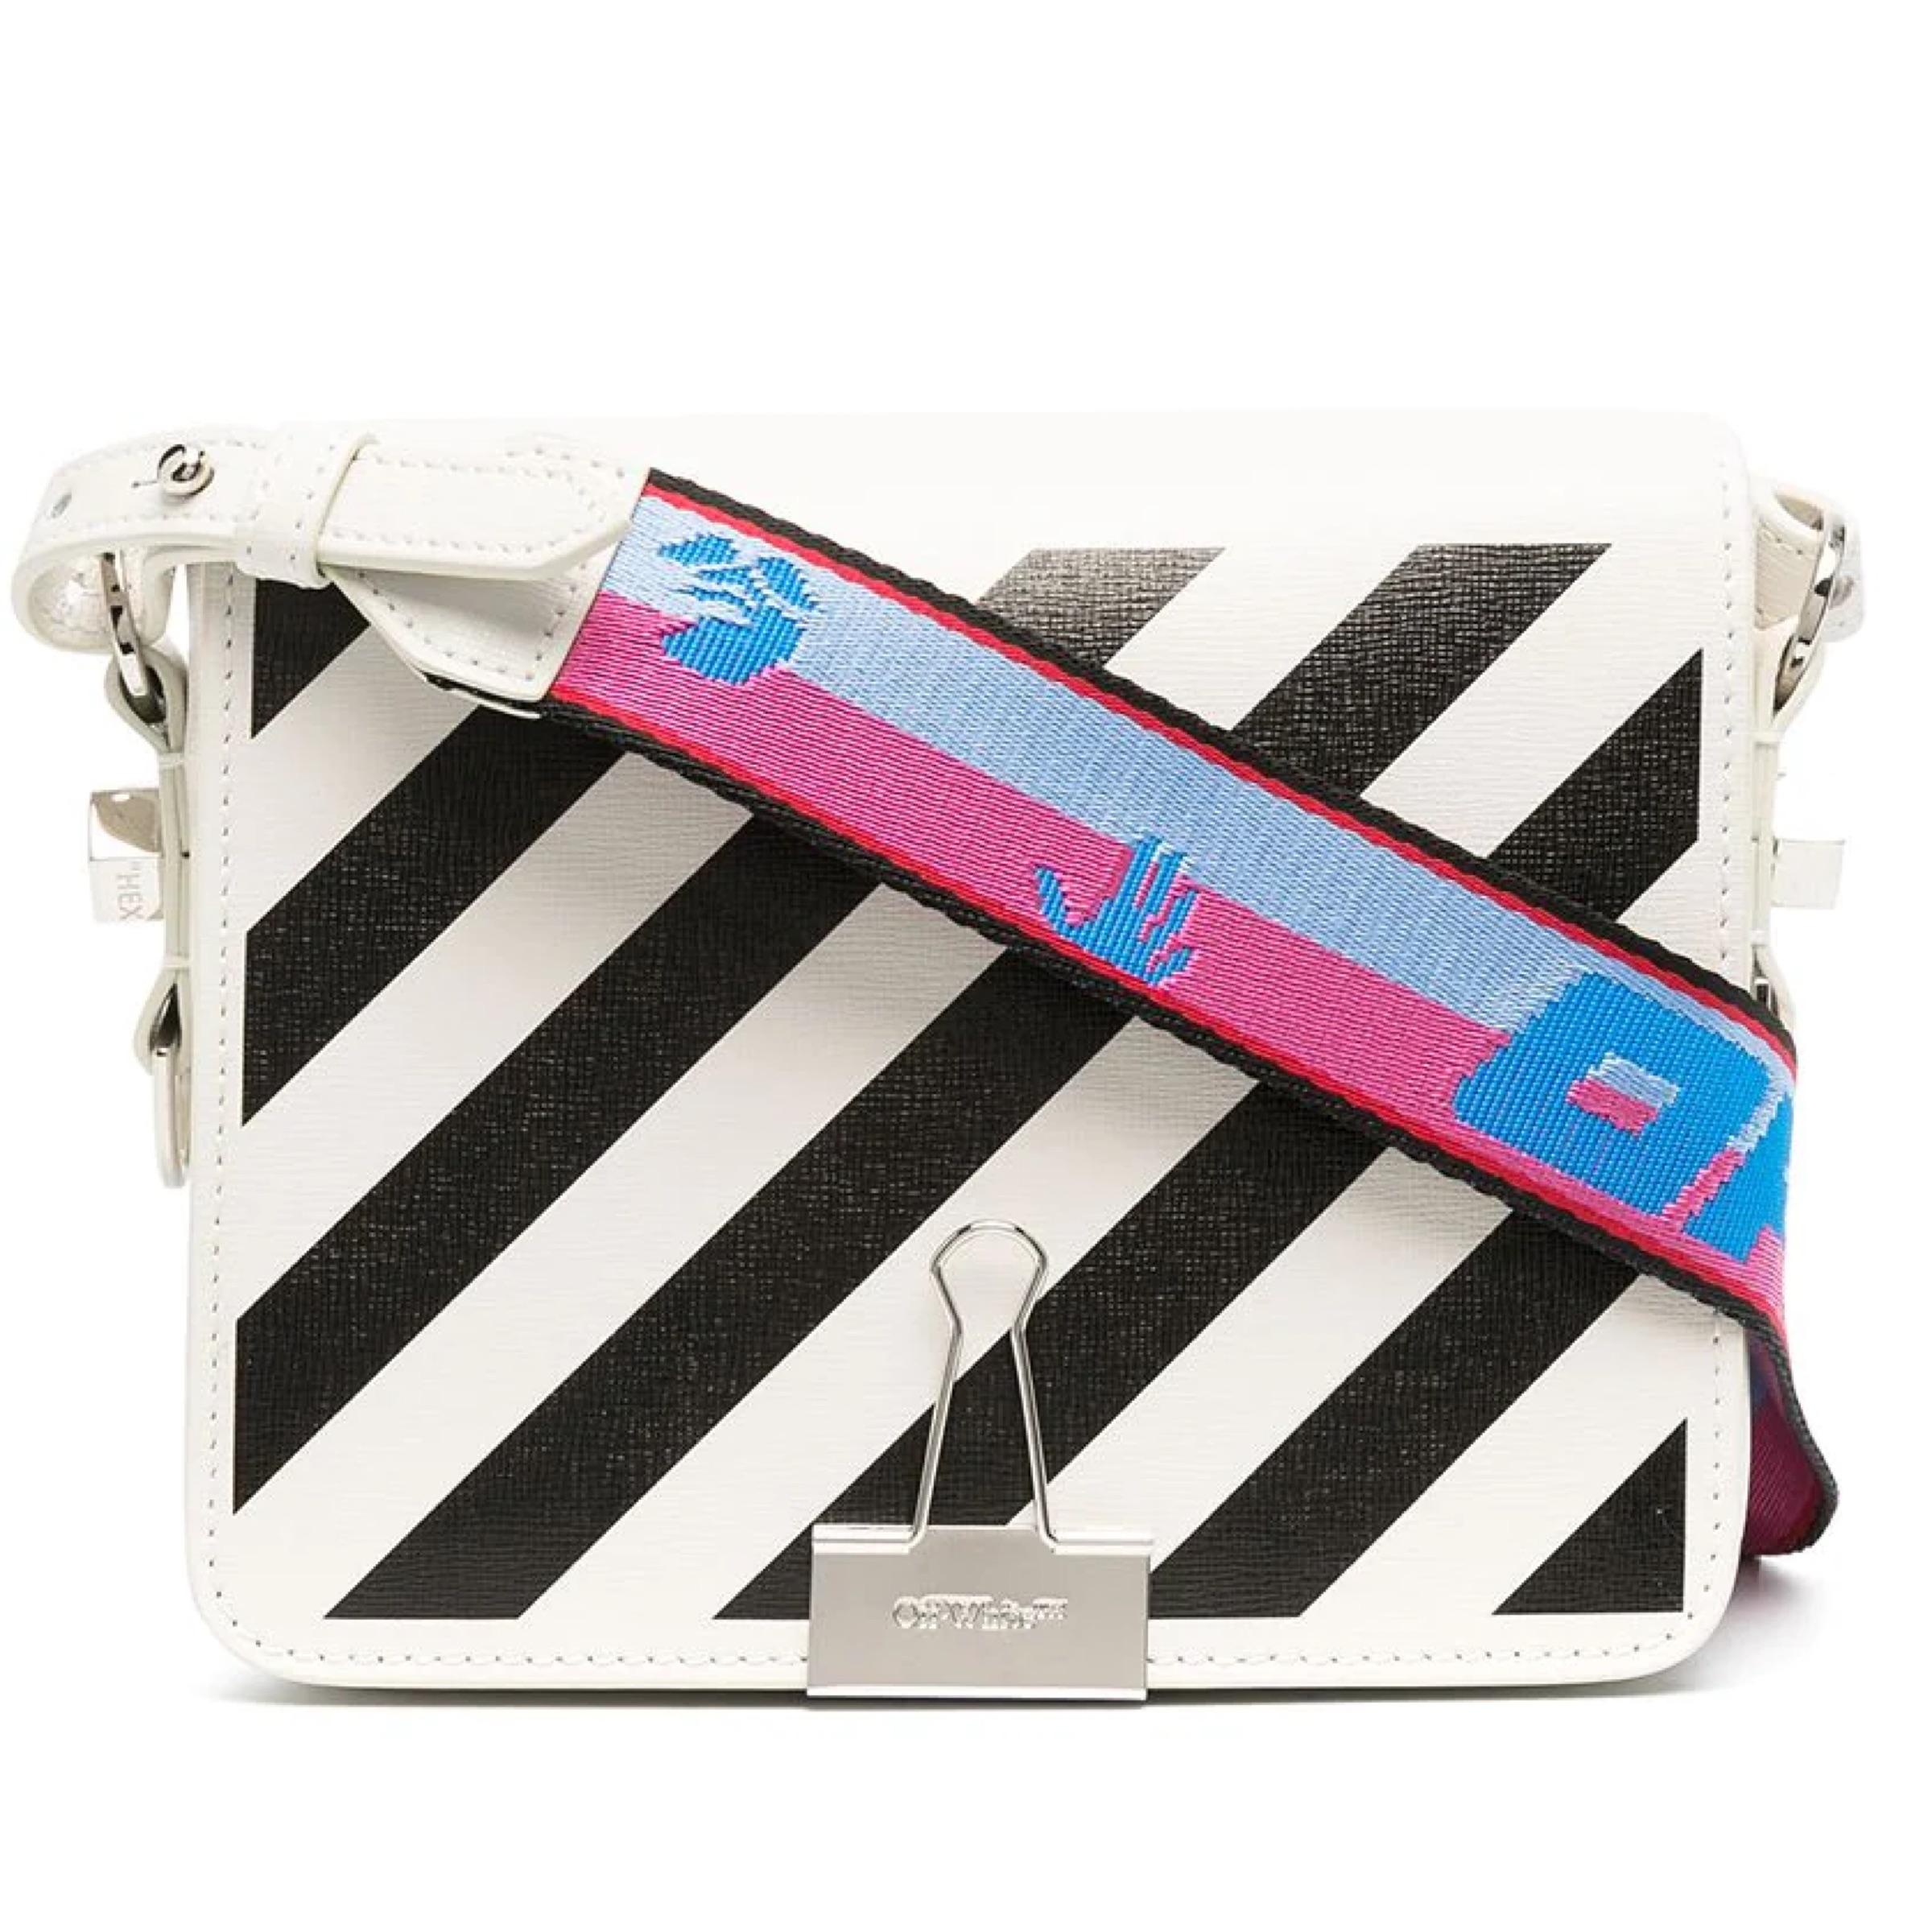 New Off-White White Women Stripe Leather Crossbody Shoulder Bag

Authenticity Guaranteed

DETAILS
Brand: Off-White
Condition: Brand New
Category: Shoulder Bag
Gender: Women
Color: White
Material: Leather
Flap closure
1 main open compartment
1